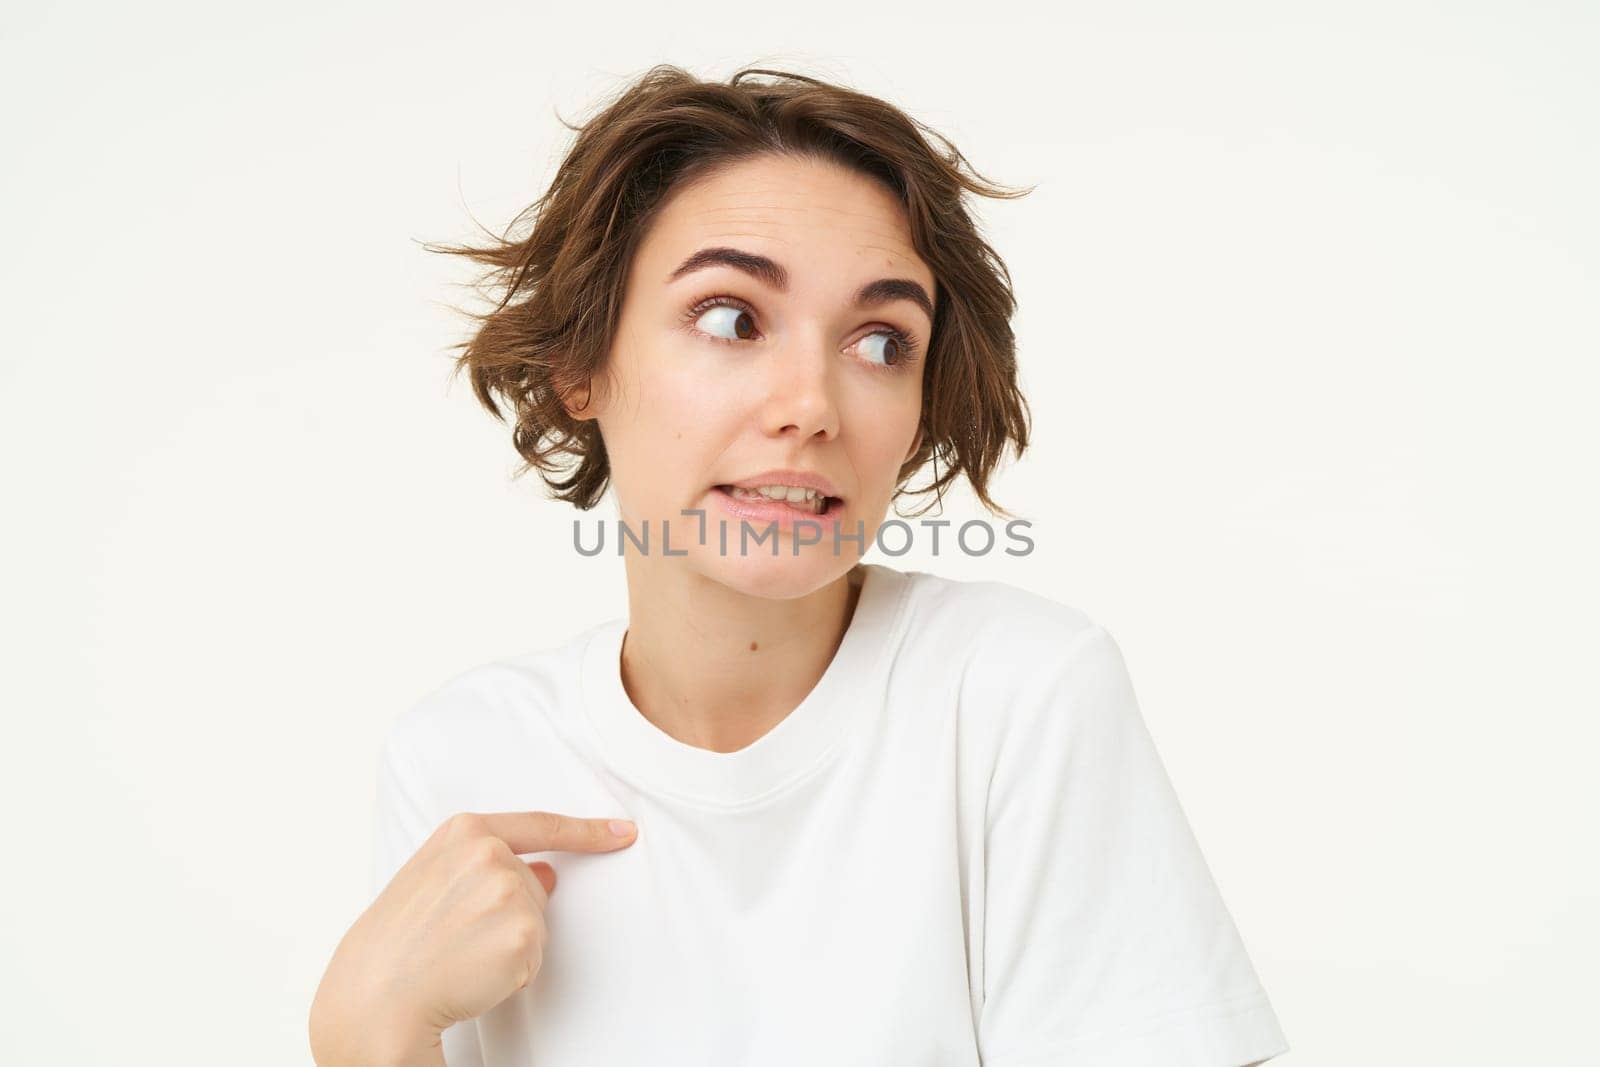 Portrait of awkward young woman, oops face, looks guilty, points at herself, being blamed or accused, stands over white background.